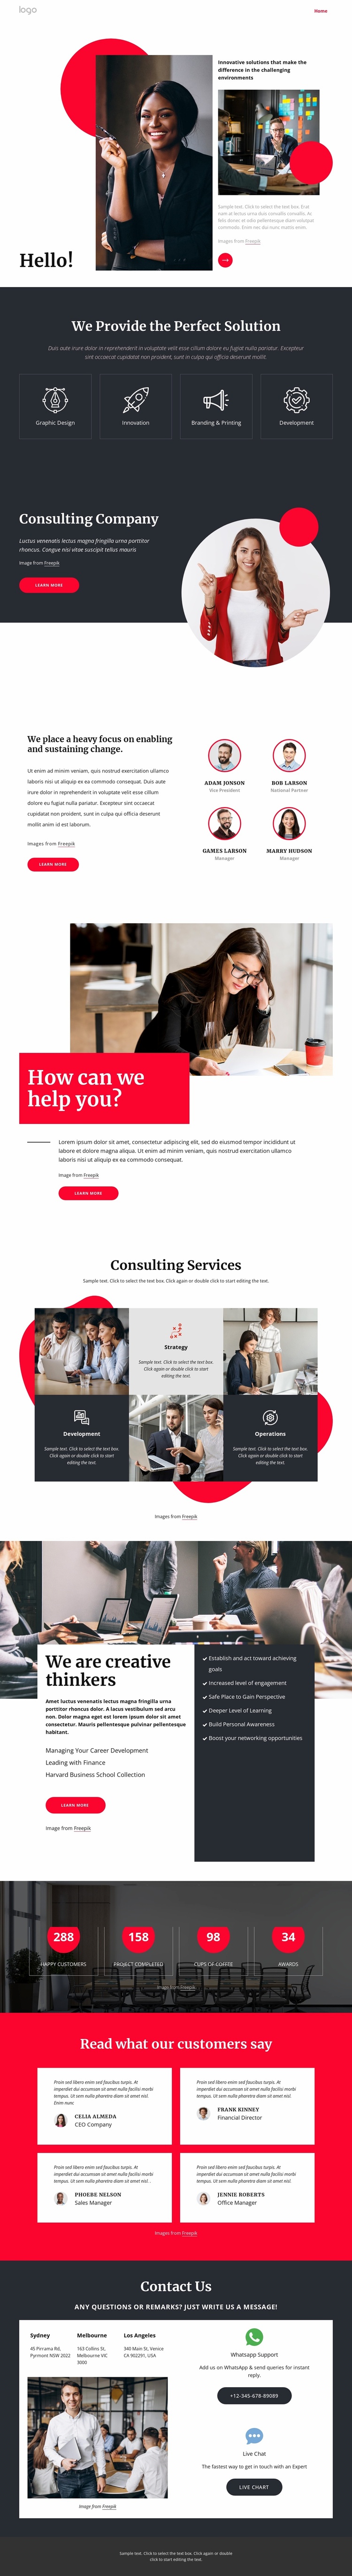 Consulting company NYC Website Template